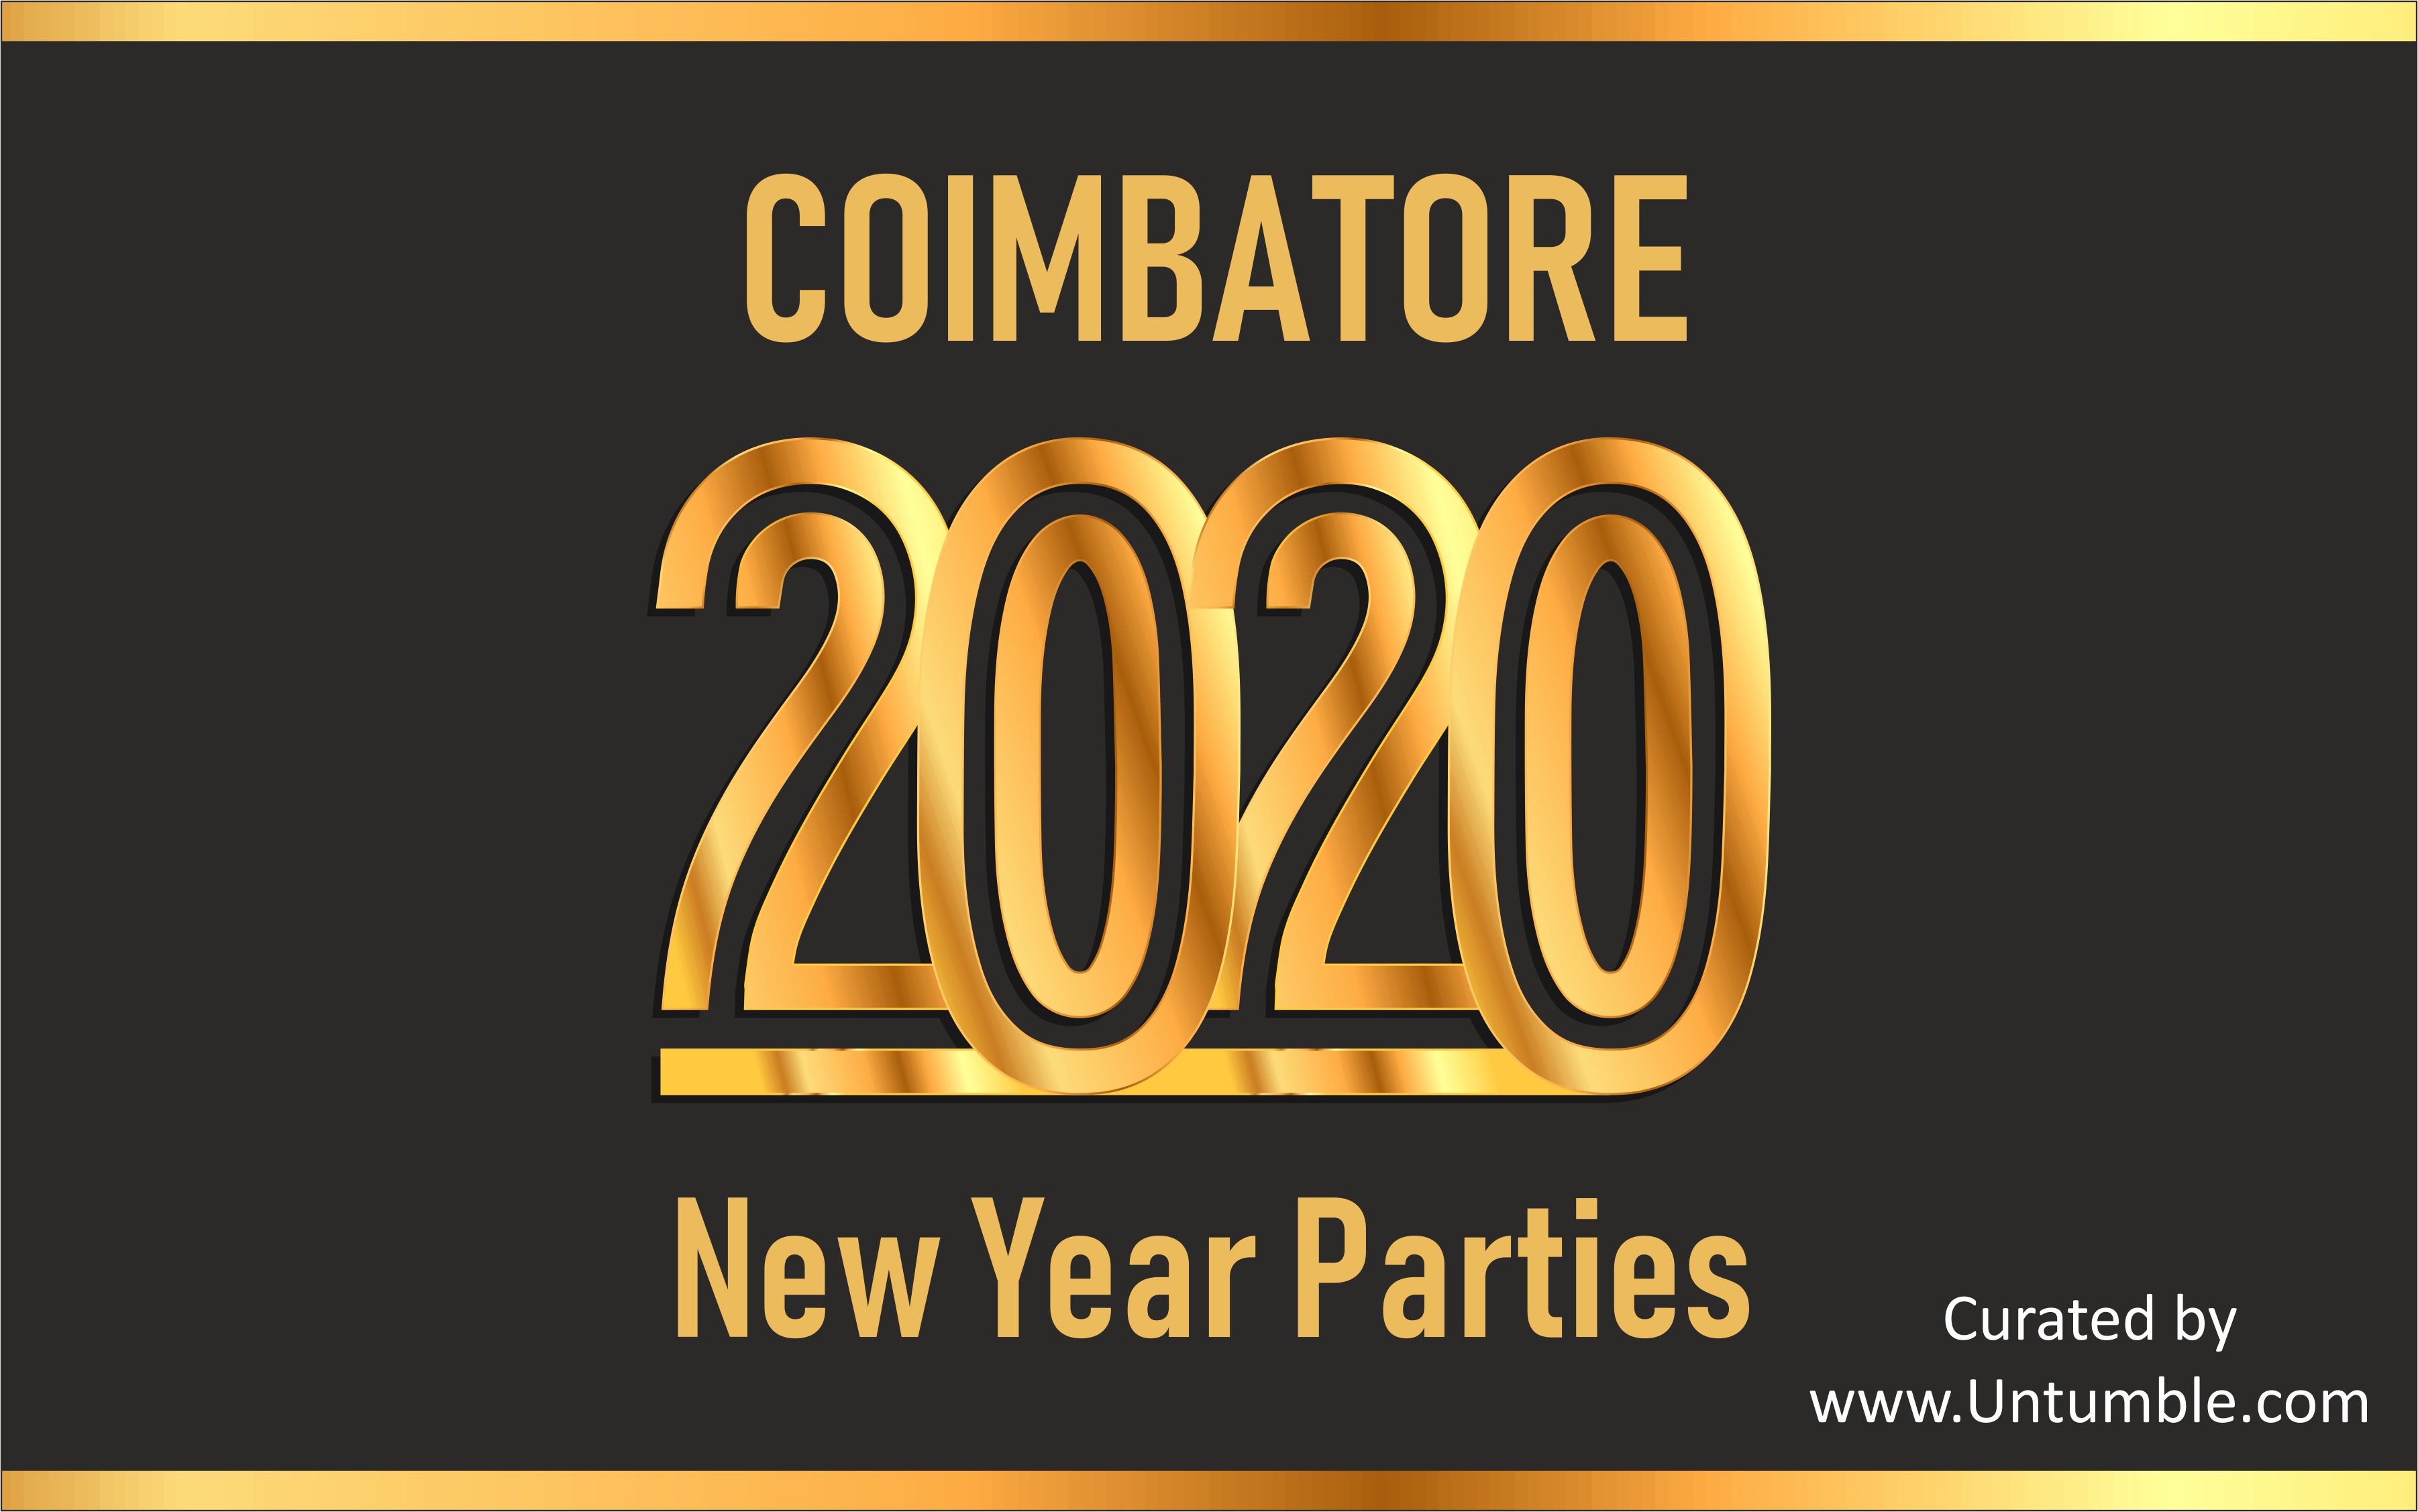 List of New Year 2020 Parties/Events in Coimbatore